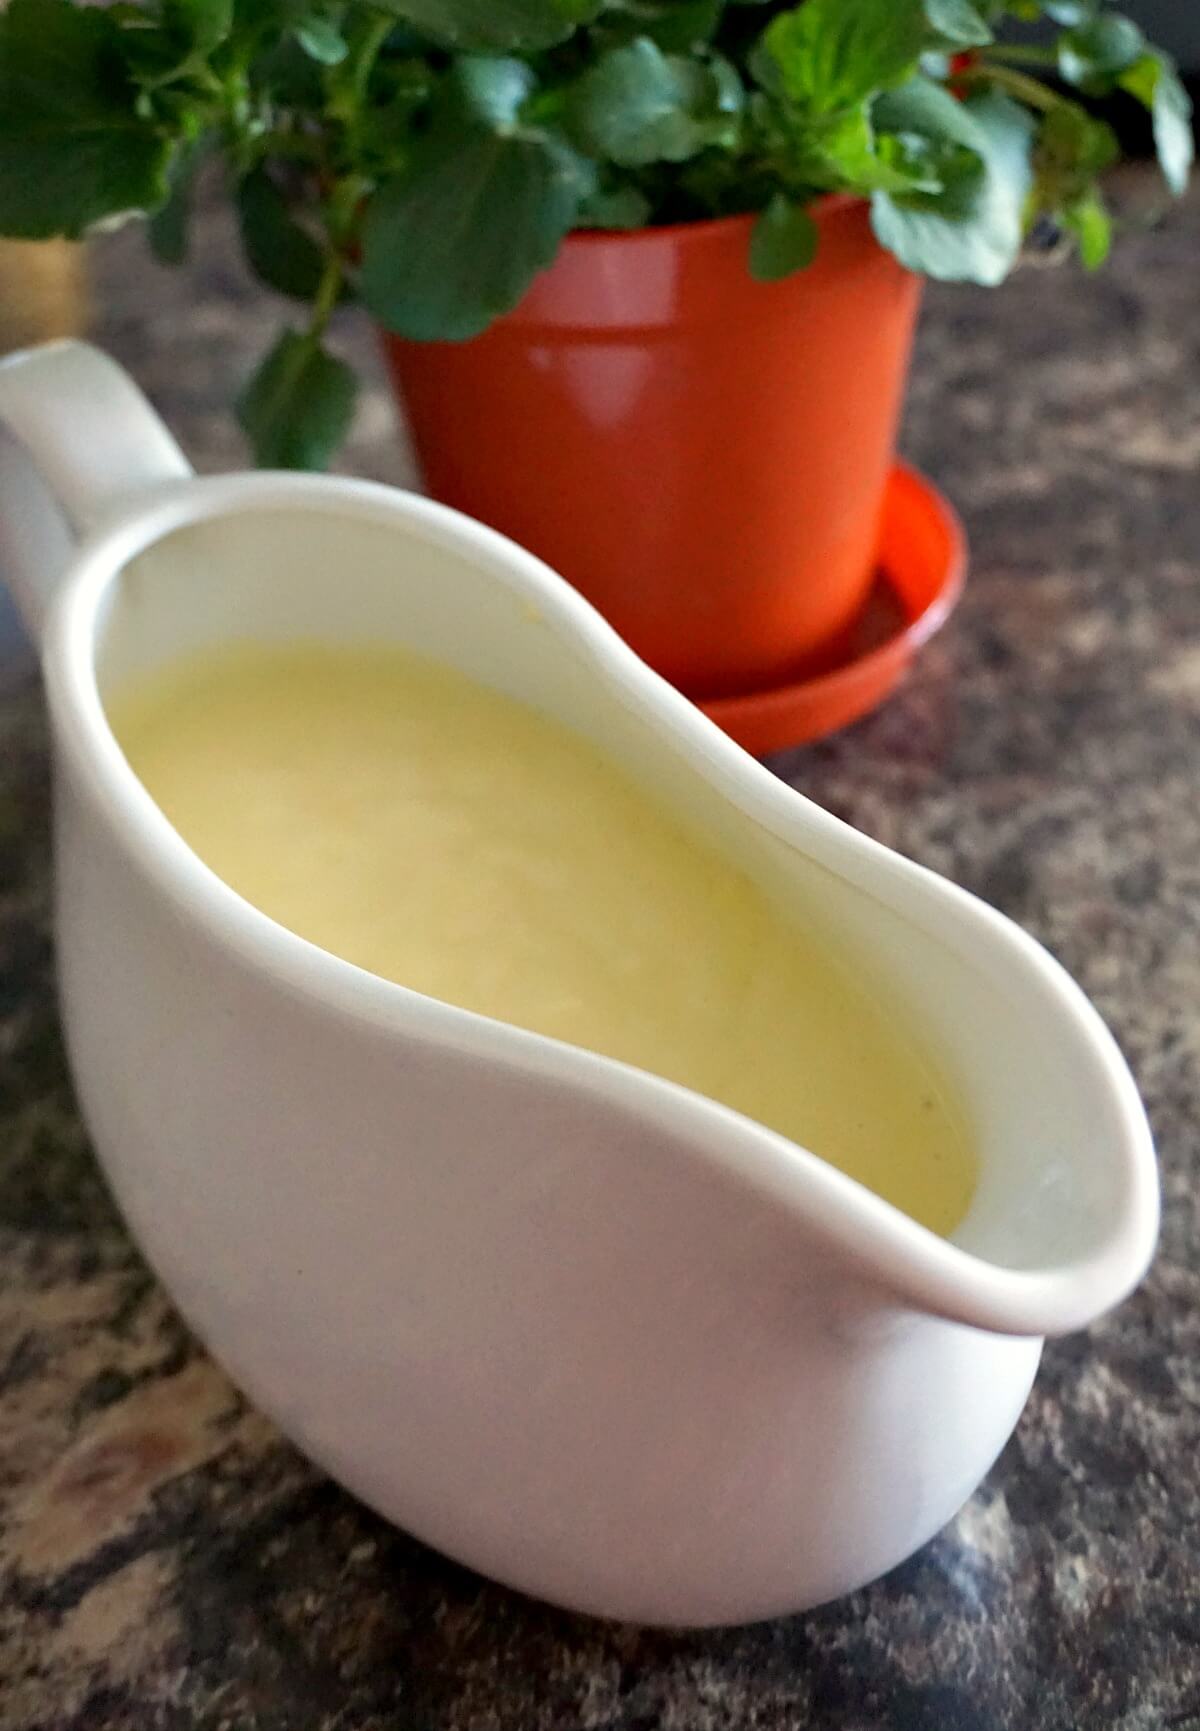 A bowl with homemade custard and a plant behind it